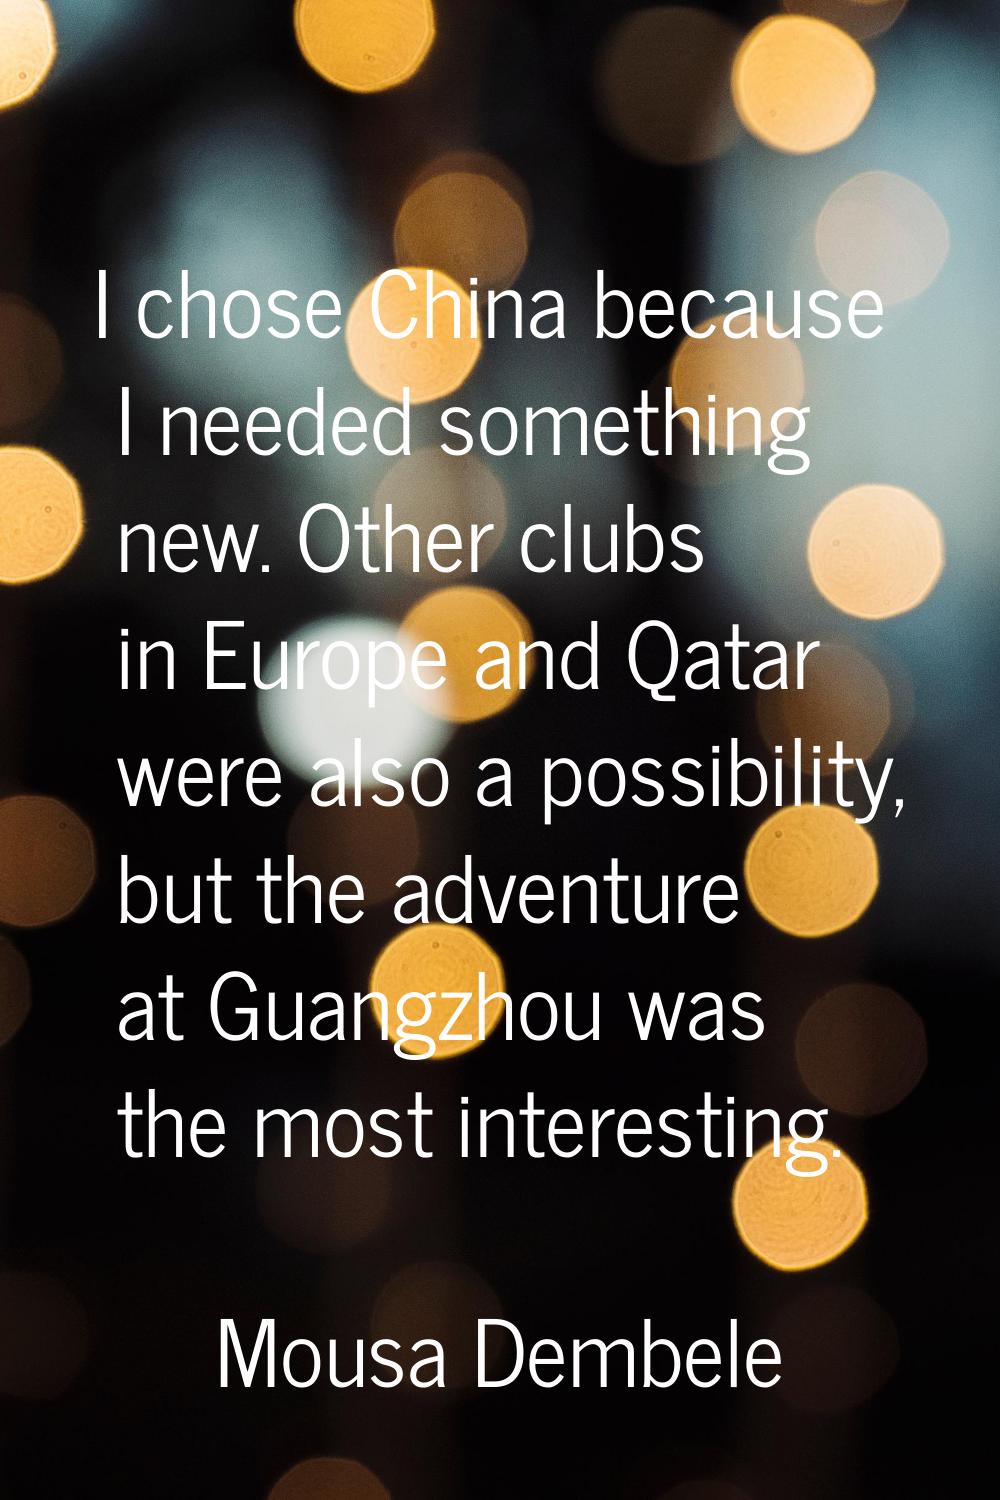 I chose China because I needed something new. Other clubs in Europe and Qatar were also a possibili